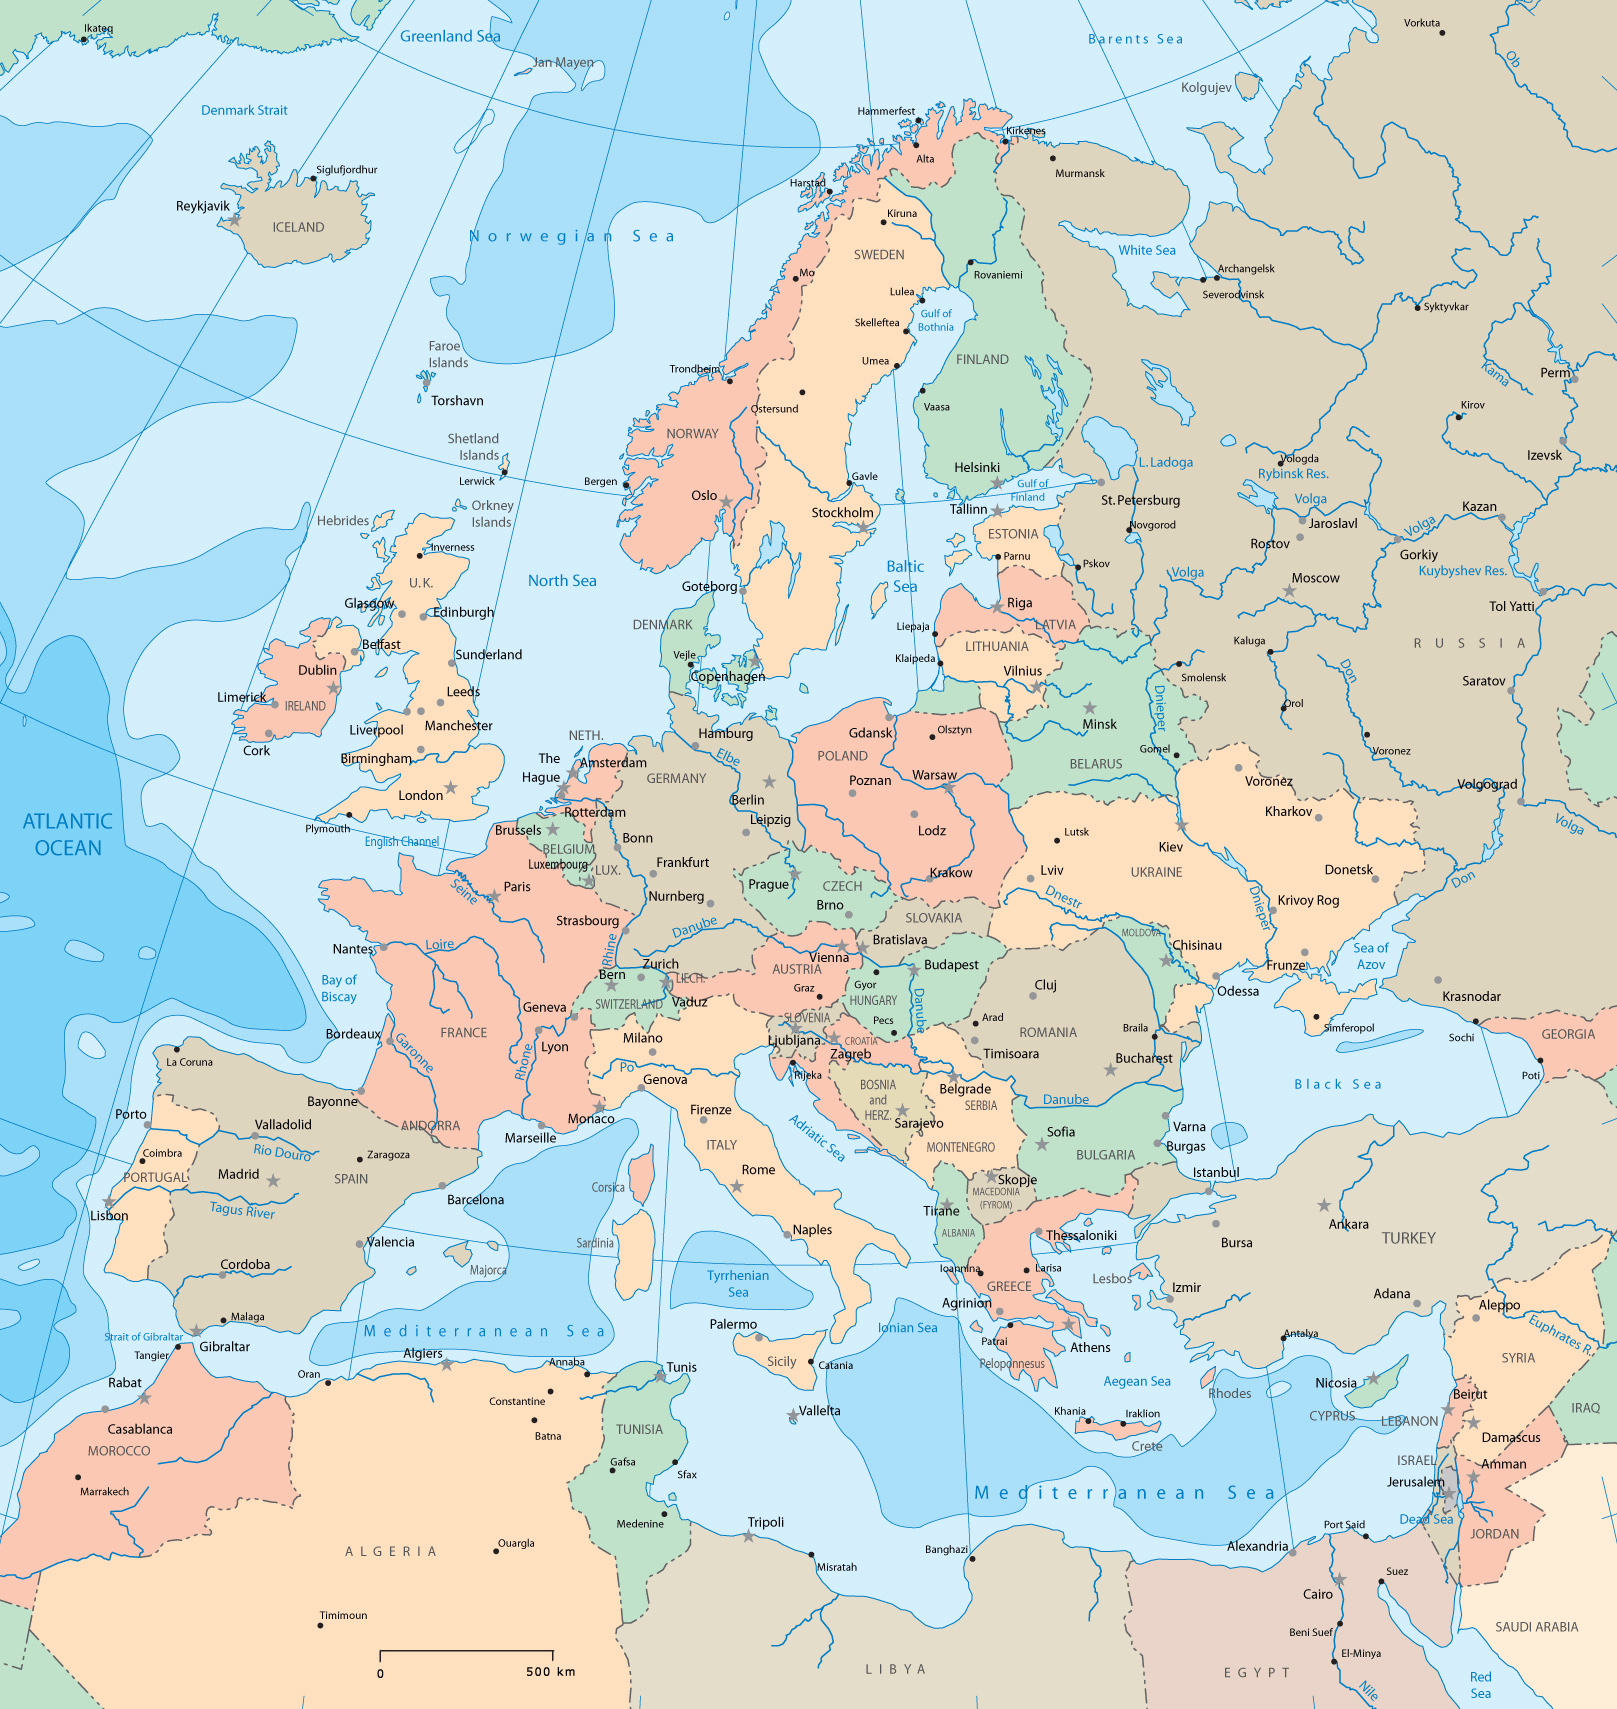 large-map-of-europe-with-cities